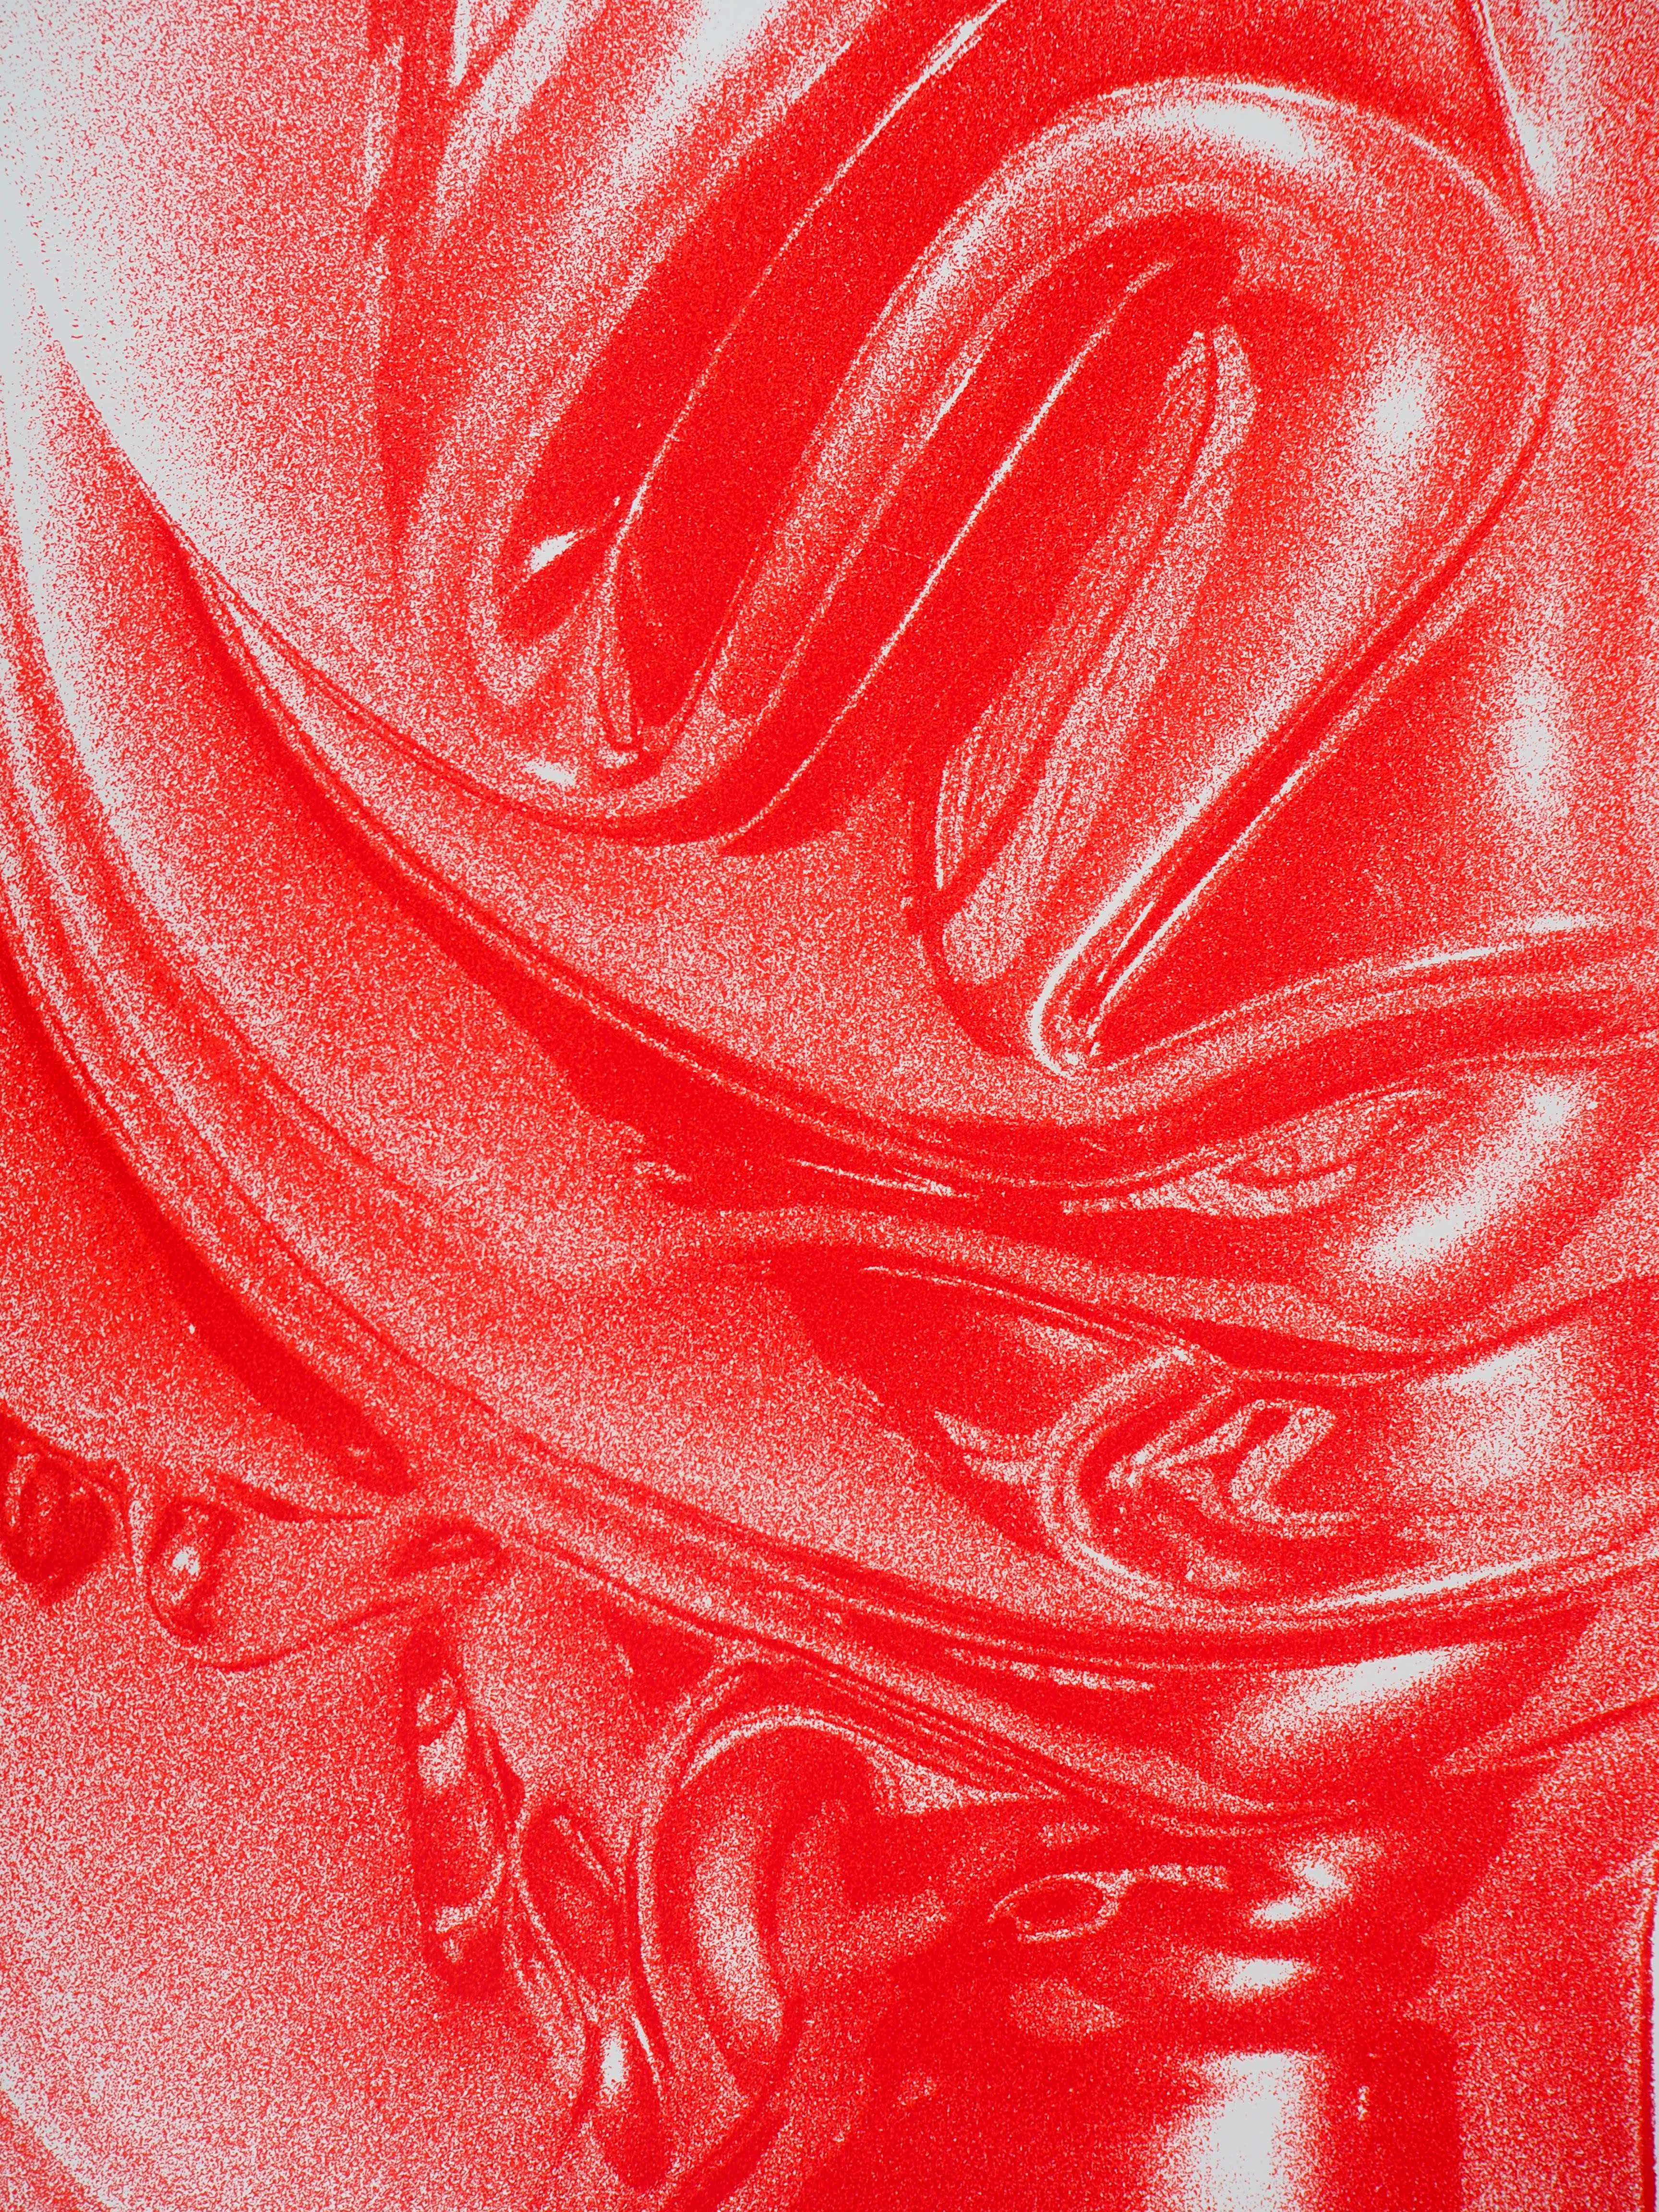 Expansion : Red Waves - Original lithograph, Handsigned - Abstract Print by César Baldaccini